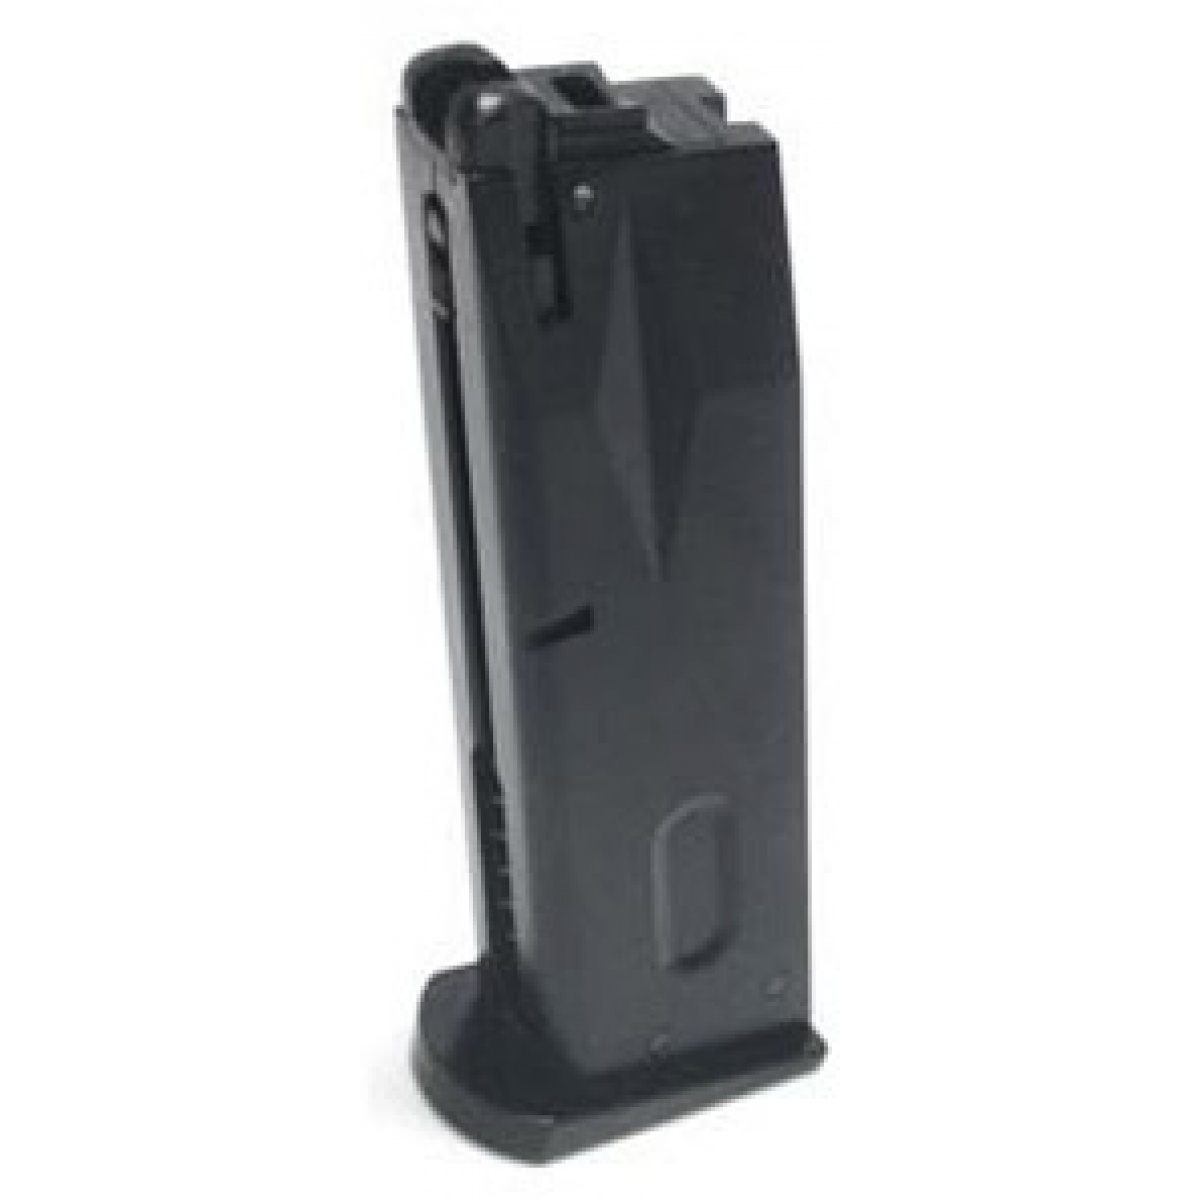 Airsoft WE 2pcs 50rd Extended Long Gas Magazine for AW Tokyo Marui M9 M92 GBB Bk 